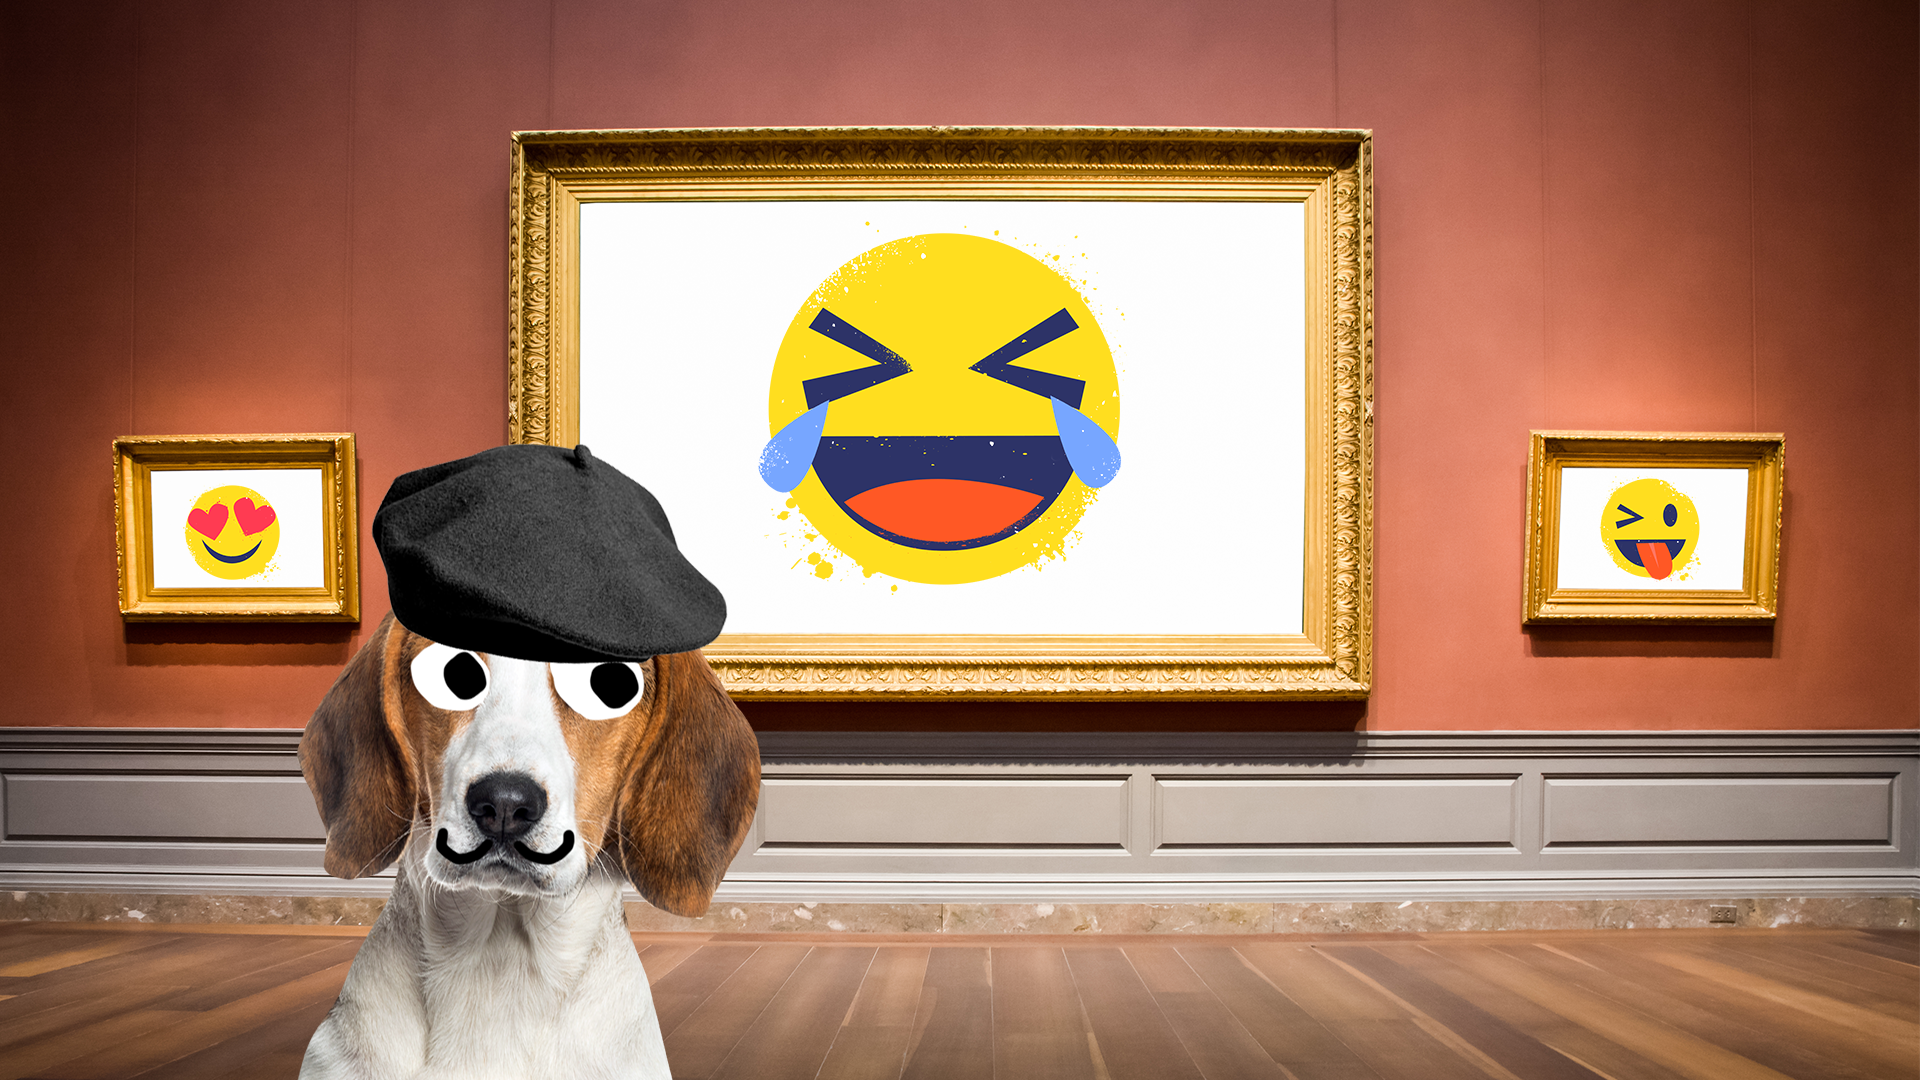 A dog in an art gallery